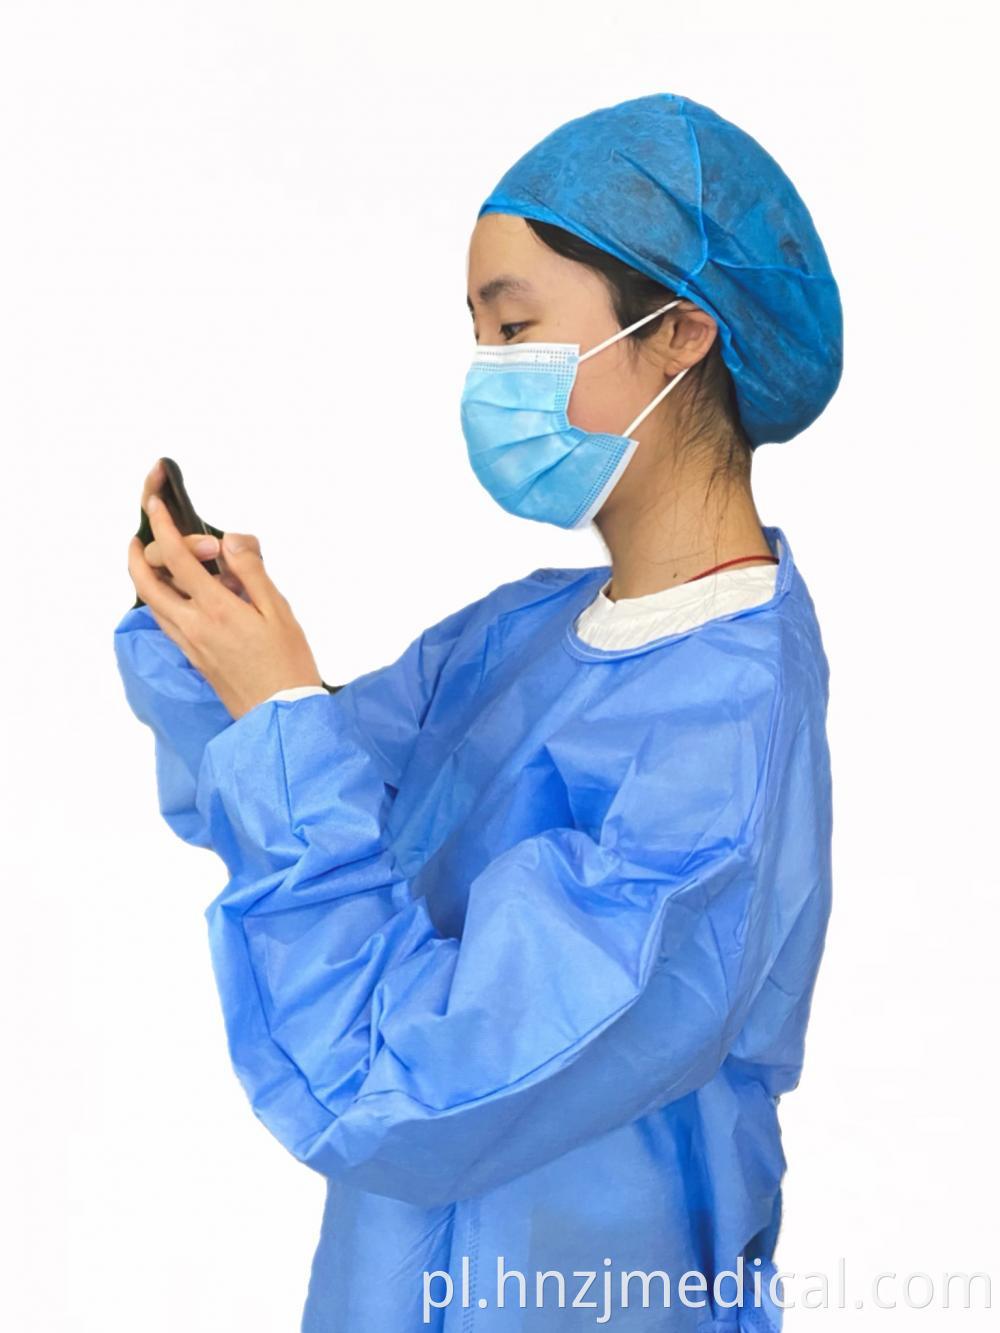 Non-Flammable Surgical Gown